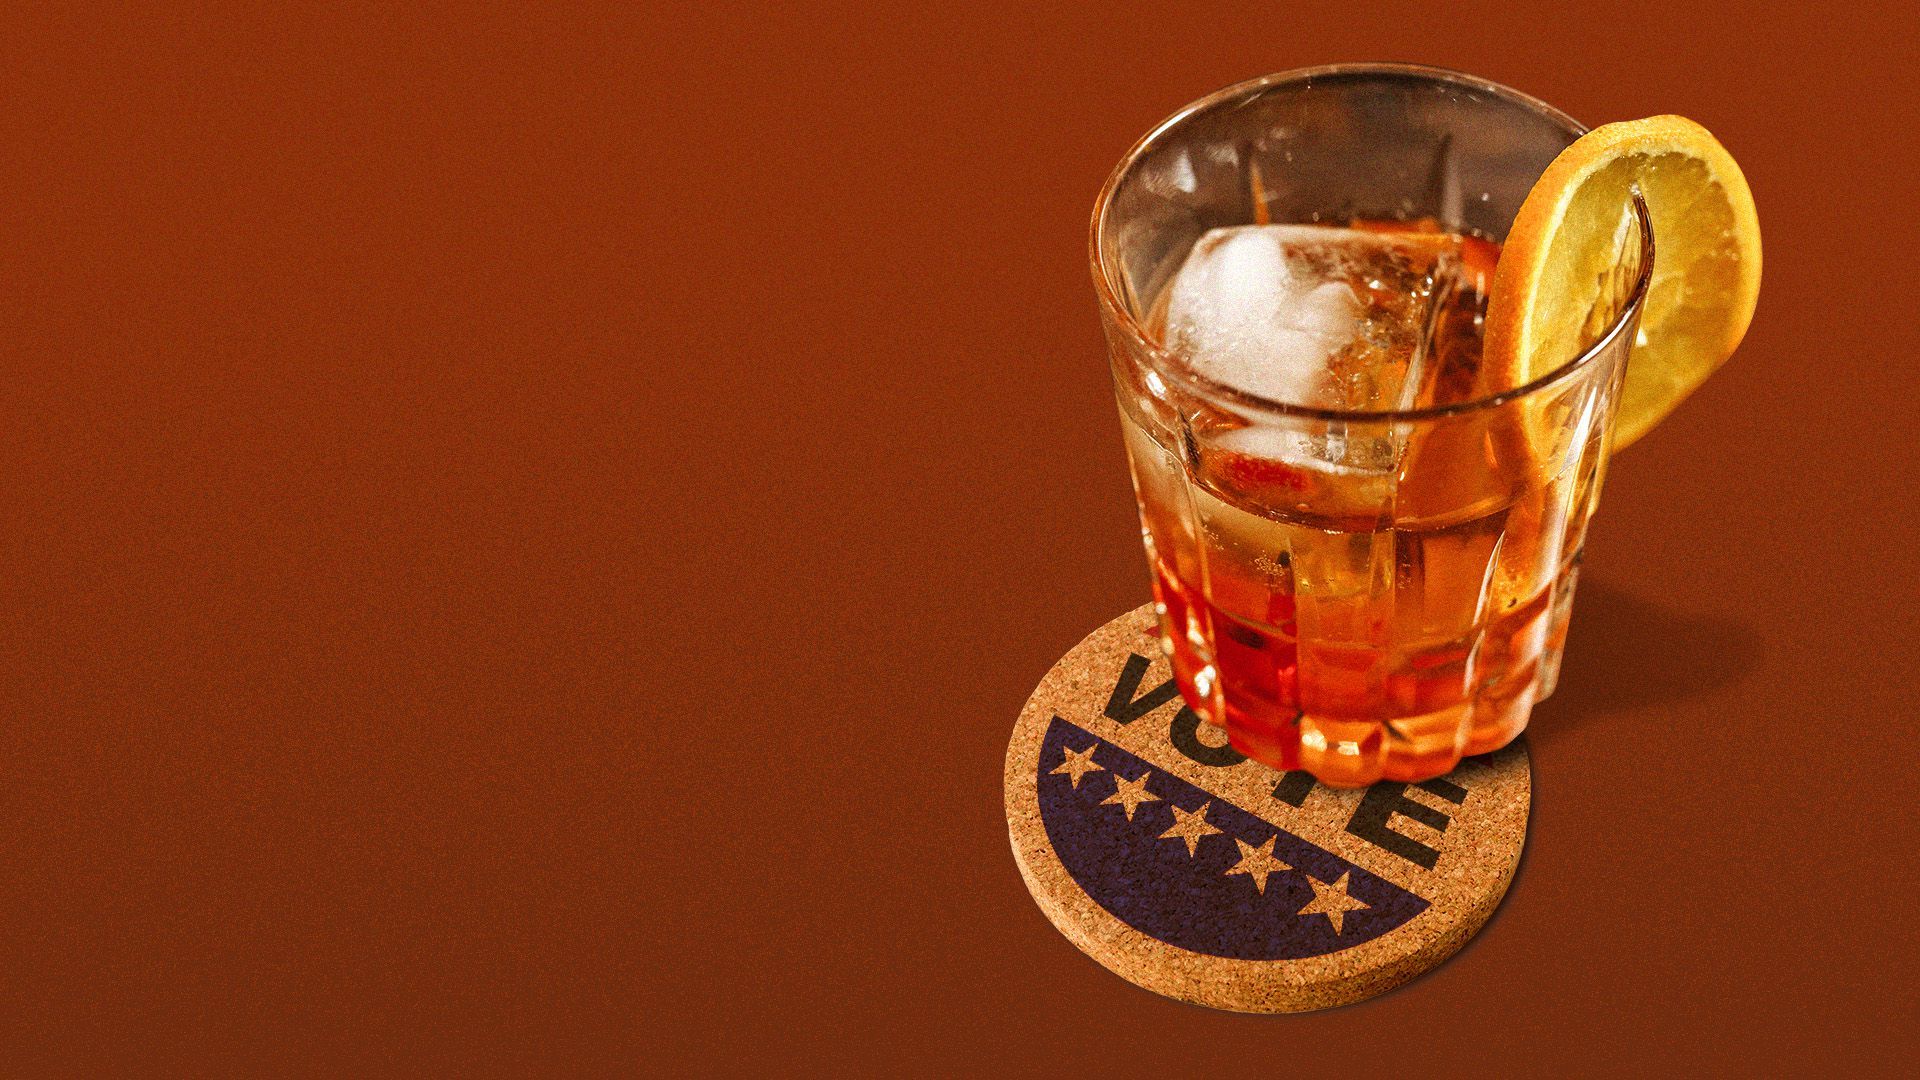 Illustration of a cocktail sitting on a coaster that looks like a vote campaign button.